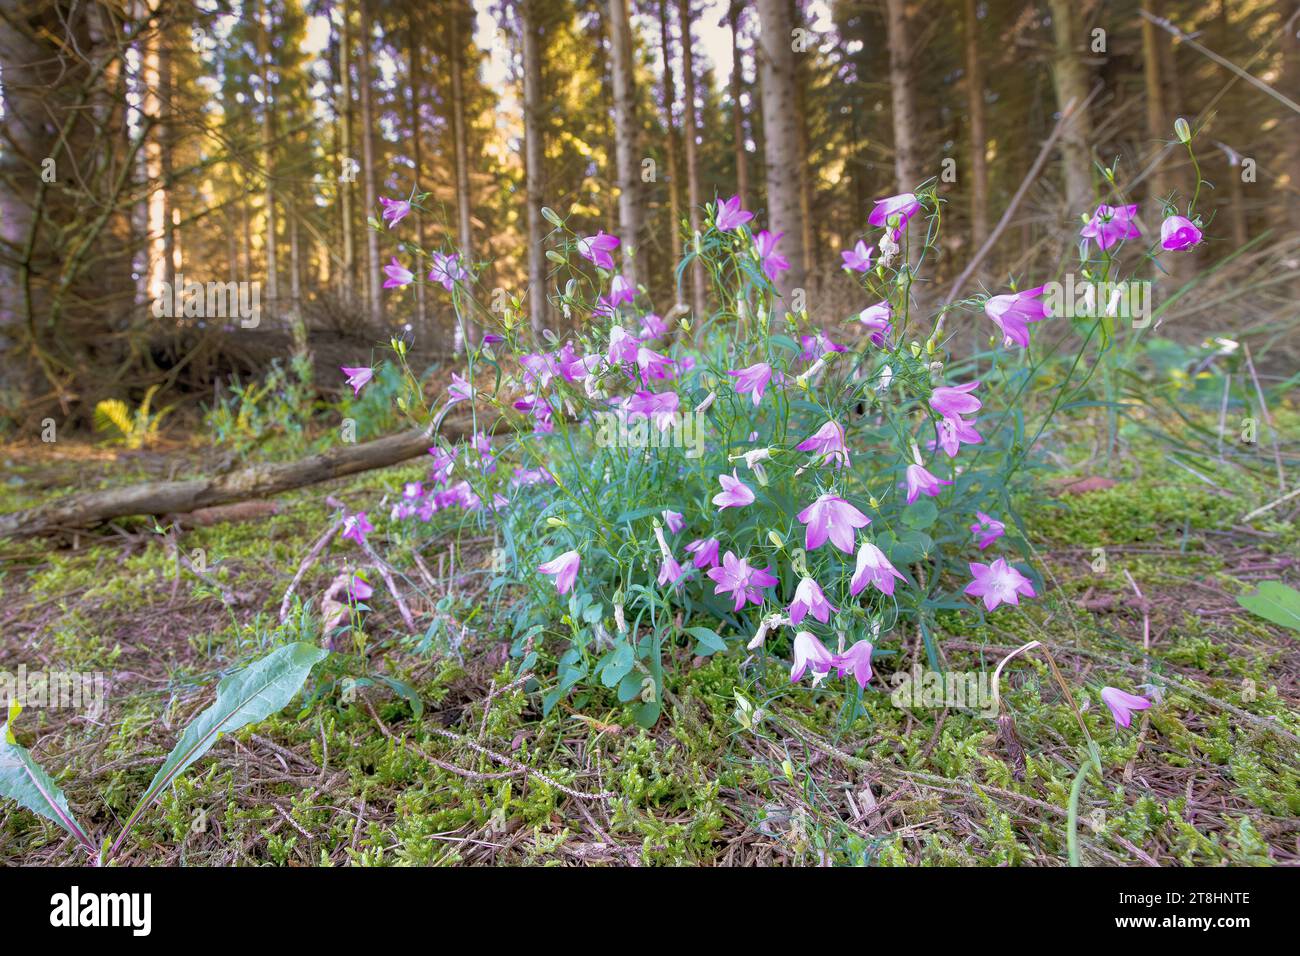 Close up of a Rapunzel bellflower or Rumpelstiltskin, Campanula rapunculus, with pink flowering calyxes against a background of mature spruce trees Stock Photo